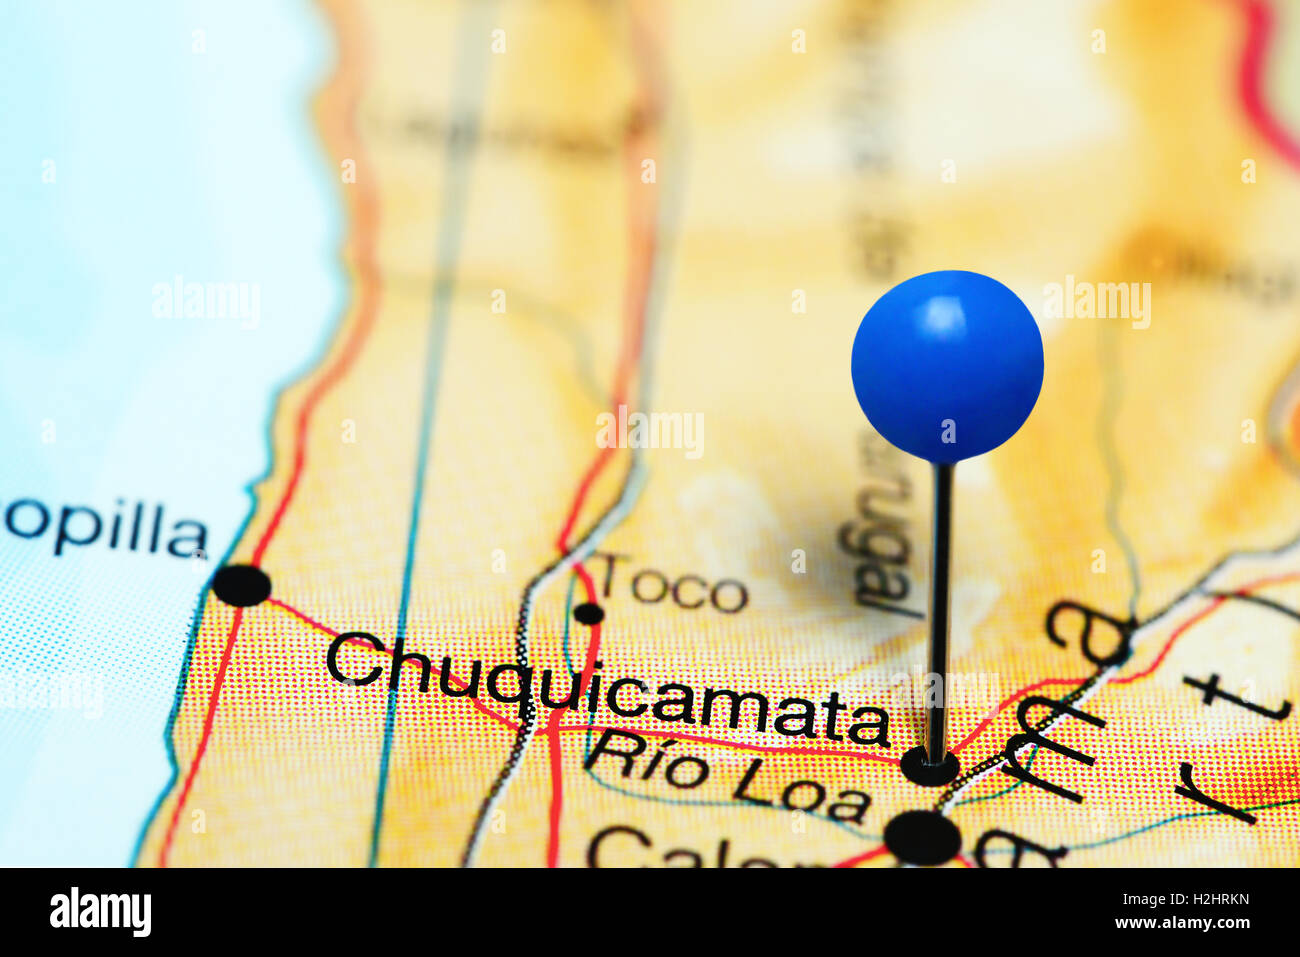 Chuquicamata pinned on a map of Chile Stock Photo